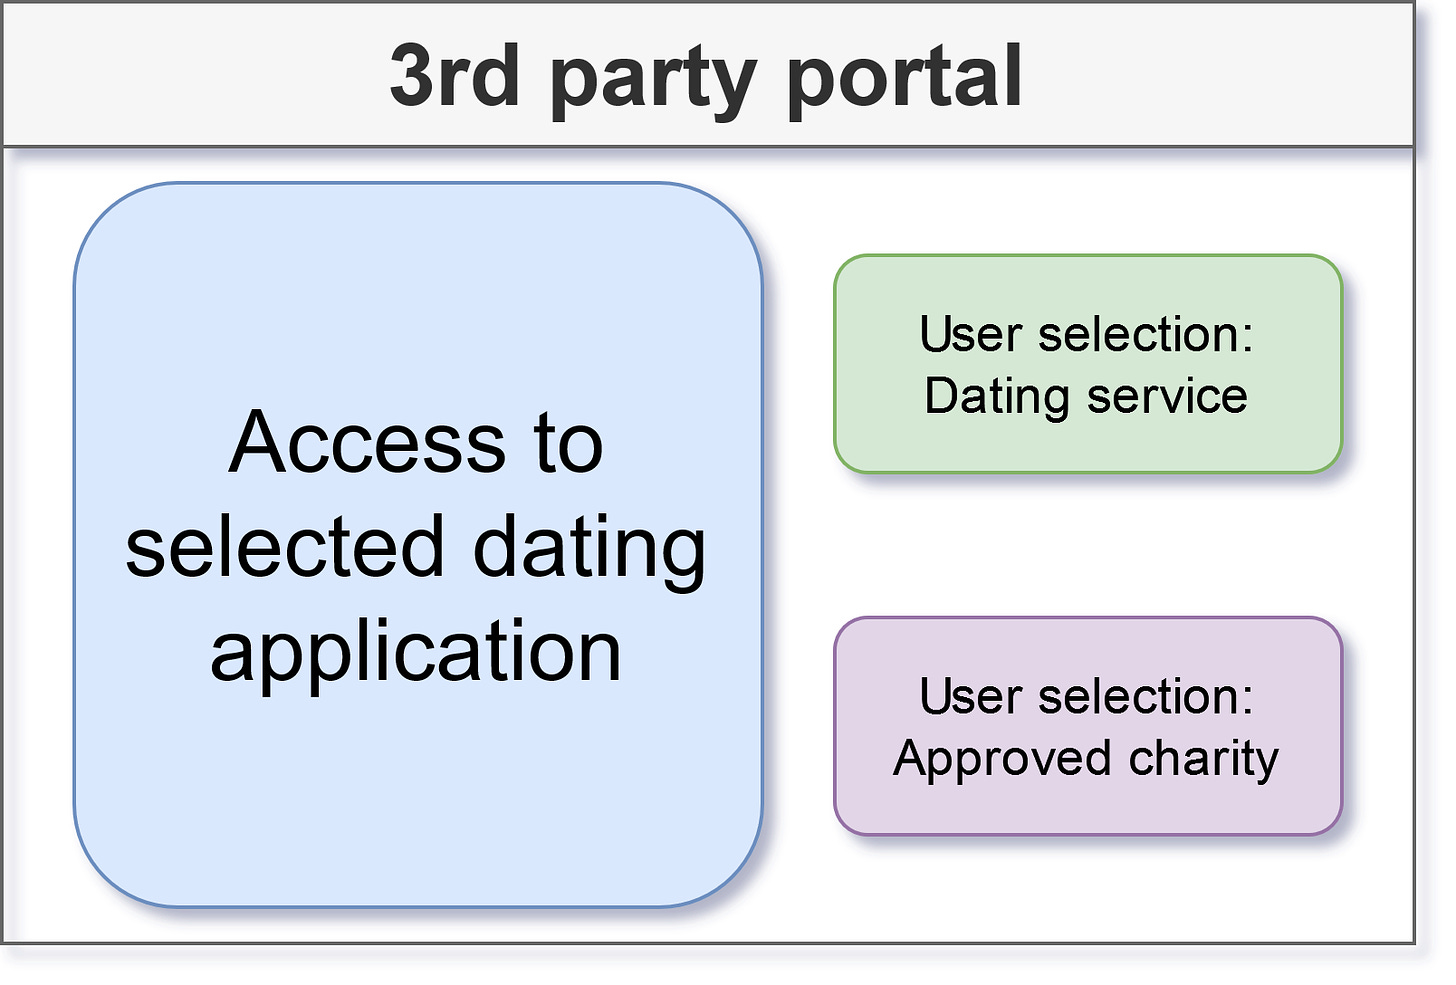 Diagram of user interface